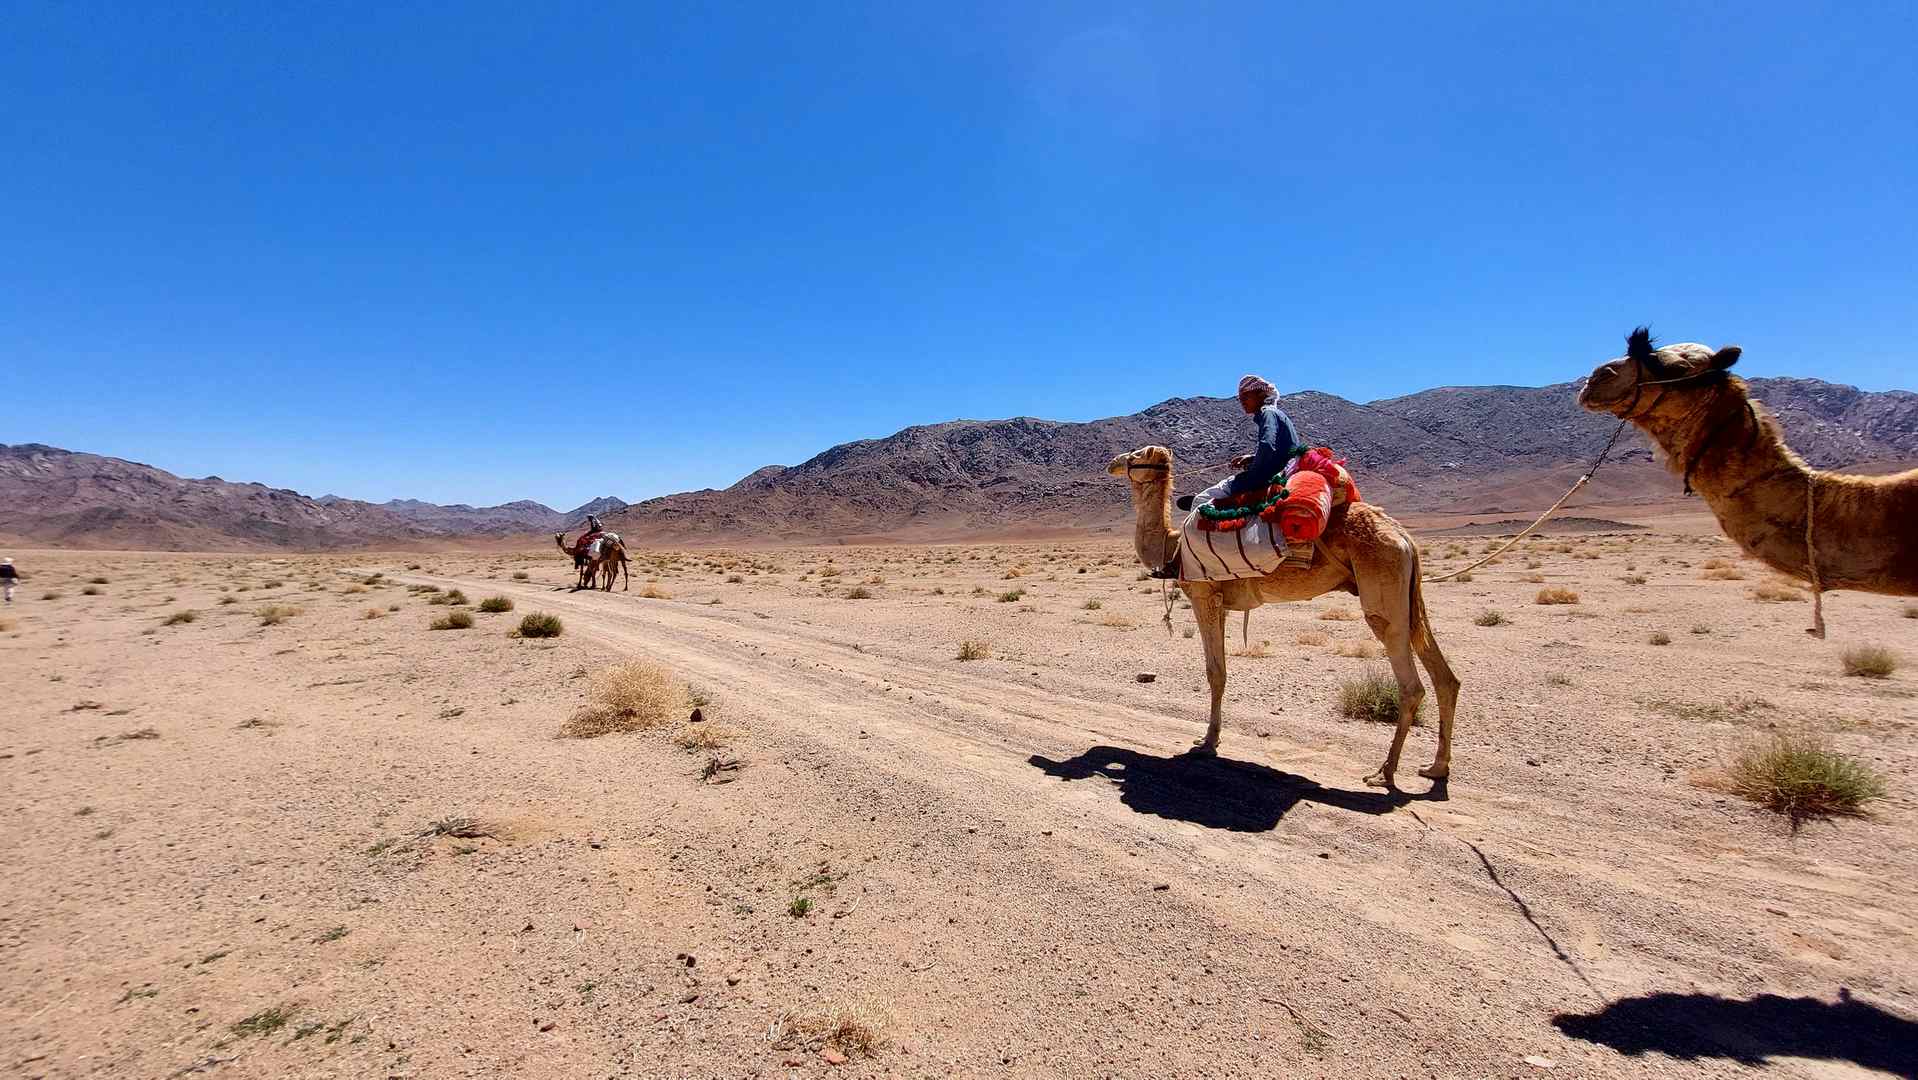 I loved this trip! The Sinai desert is unli...